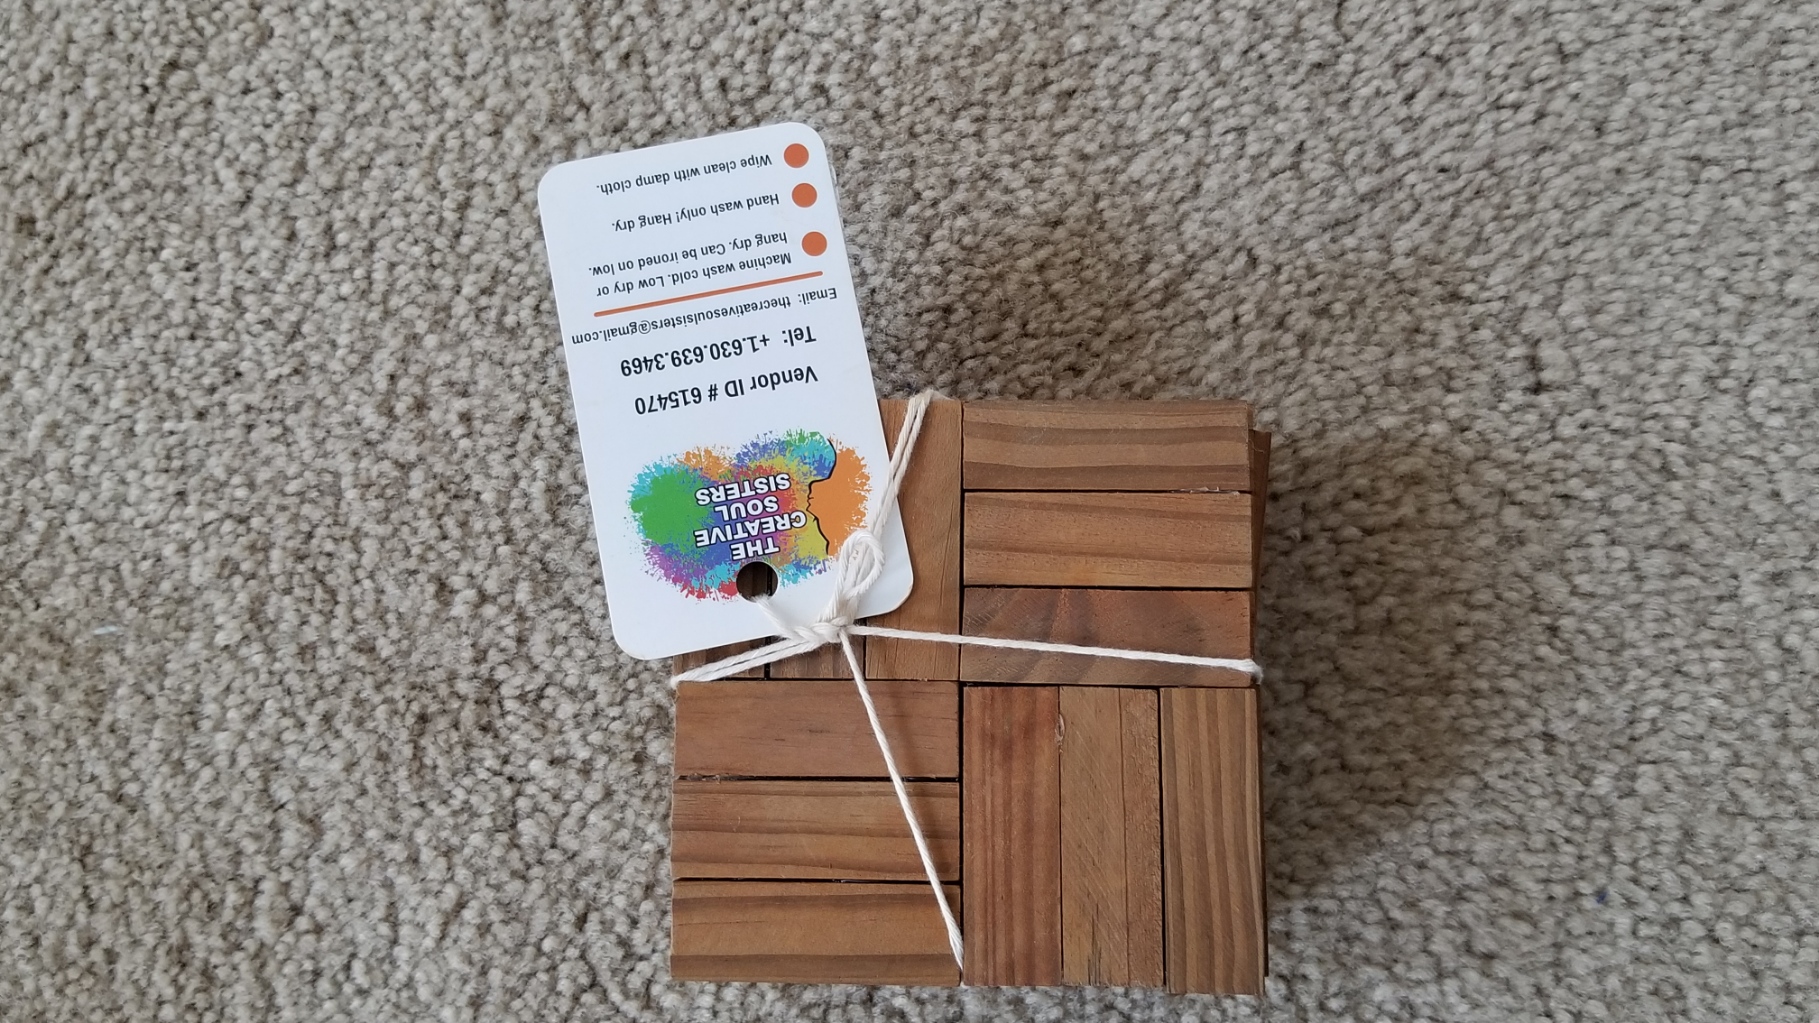 This Handmade Wood Parquet Coasters - set of 5 pieces is made with love by The Creative Soul Sisters! Shop more unique gift ideas today with Spots Initiatives, the best way to support creators.